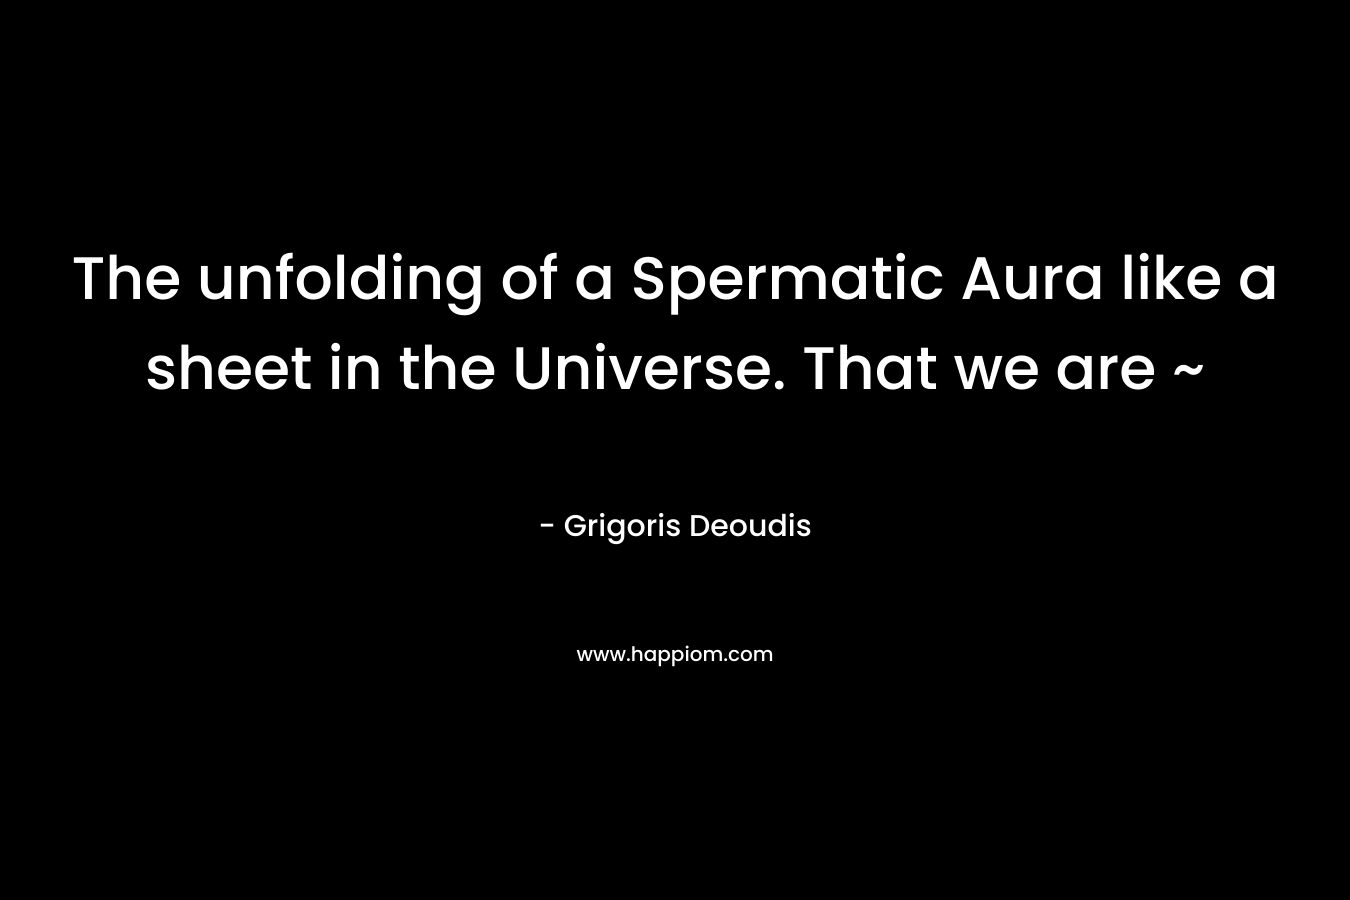 The unfolding of a Spermatic Aura like a sheet in the Universe. That we are ~